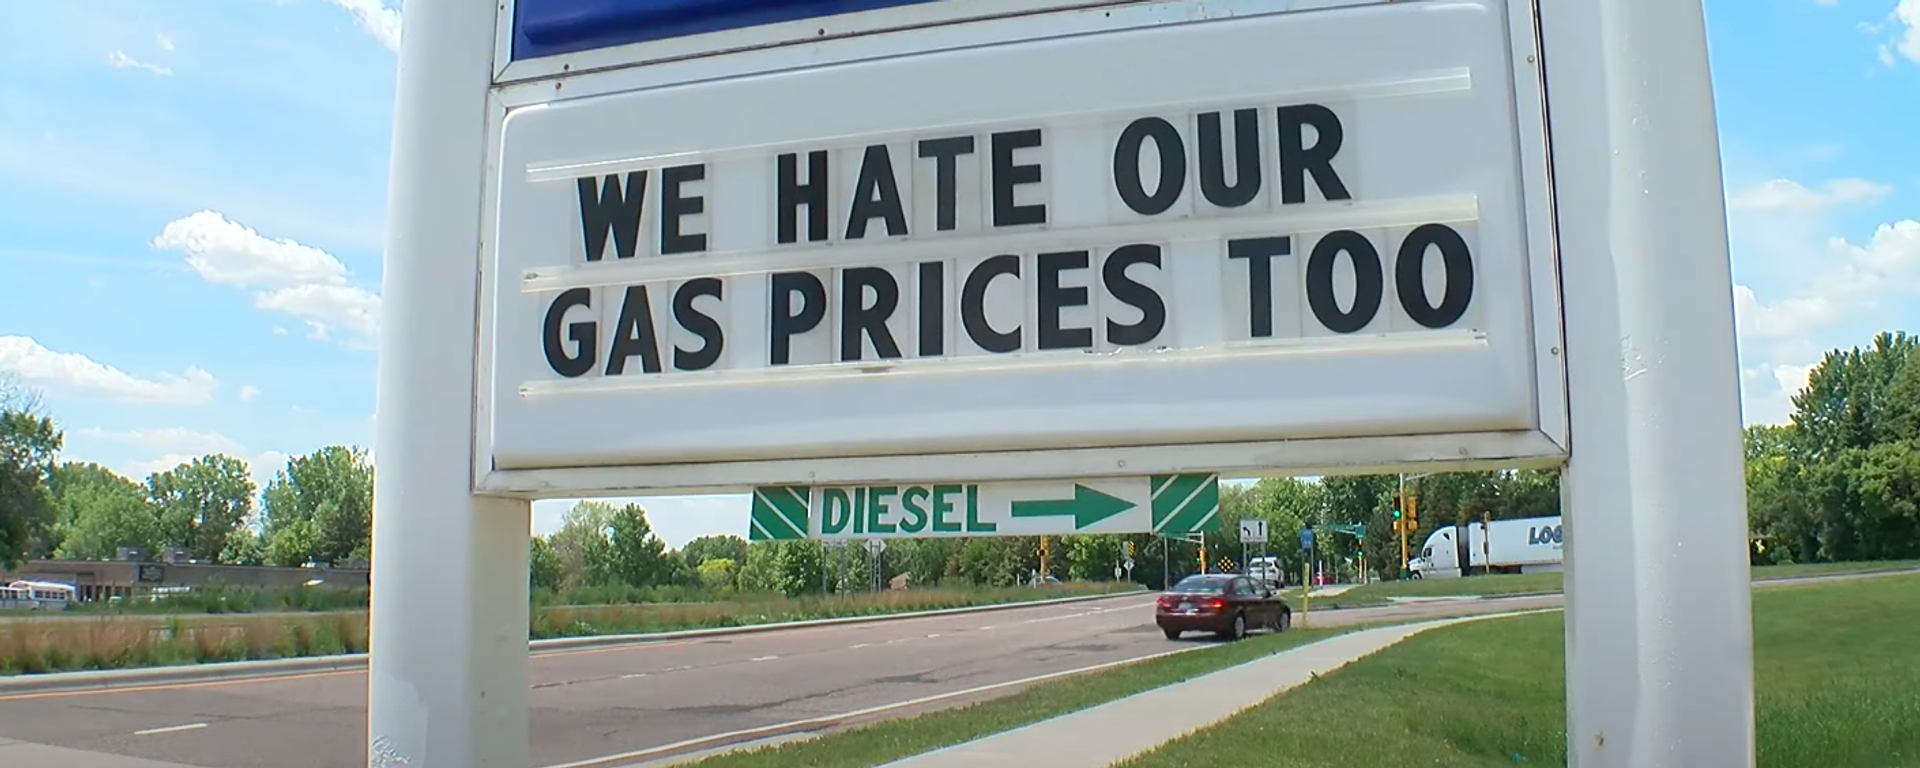 Gas station sign in Minnesota expressing sympathy for its customers as US national average gas prices top $5 bucks a gallon. Screengrab of WCCO - CBS Minnesota report. - Sputnik International, 1920, 26.06.2022